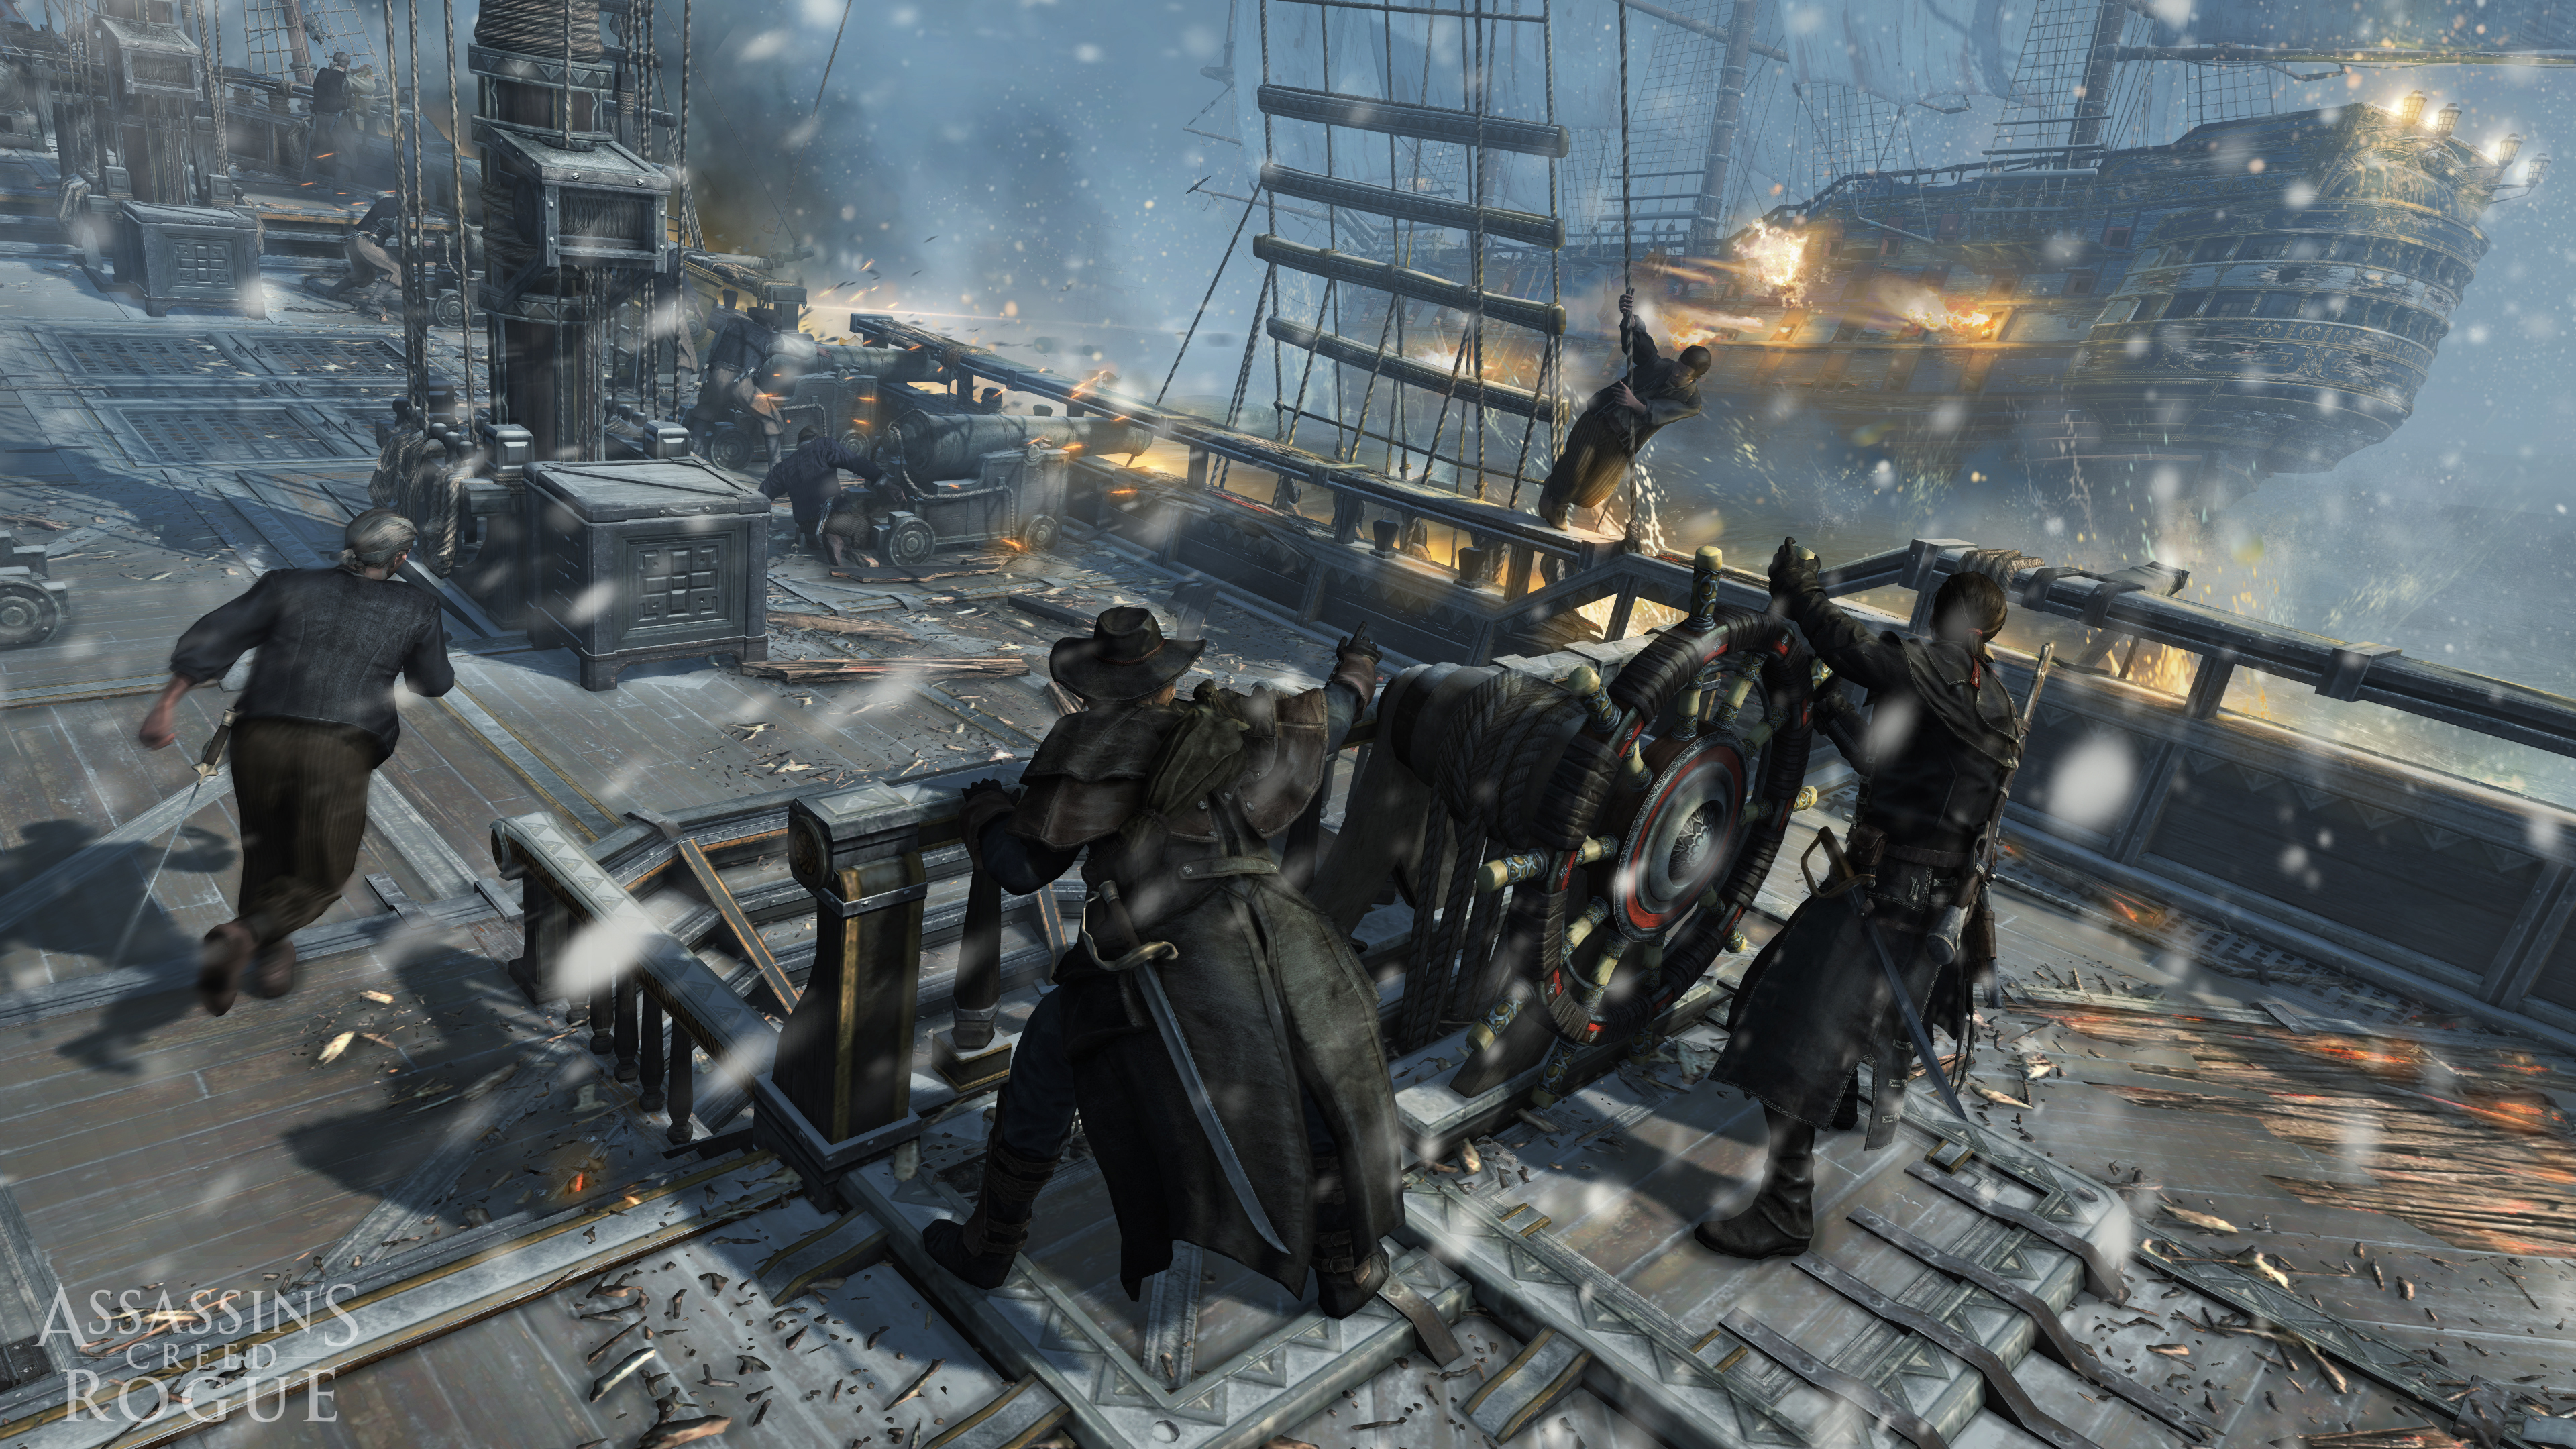 Assassin's Creed: Rogue - Naval Fight